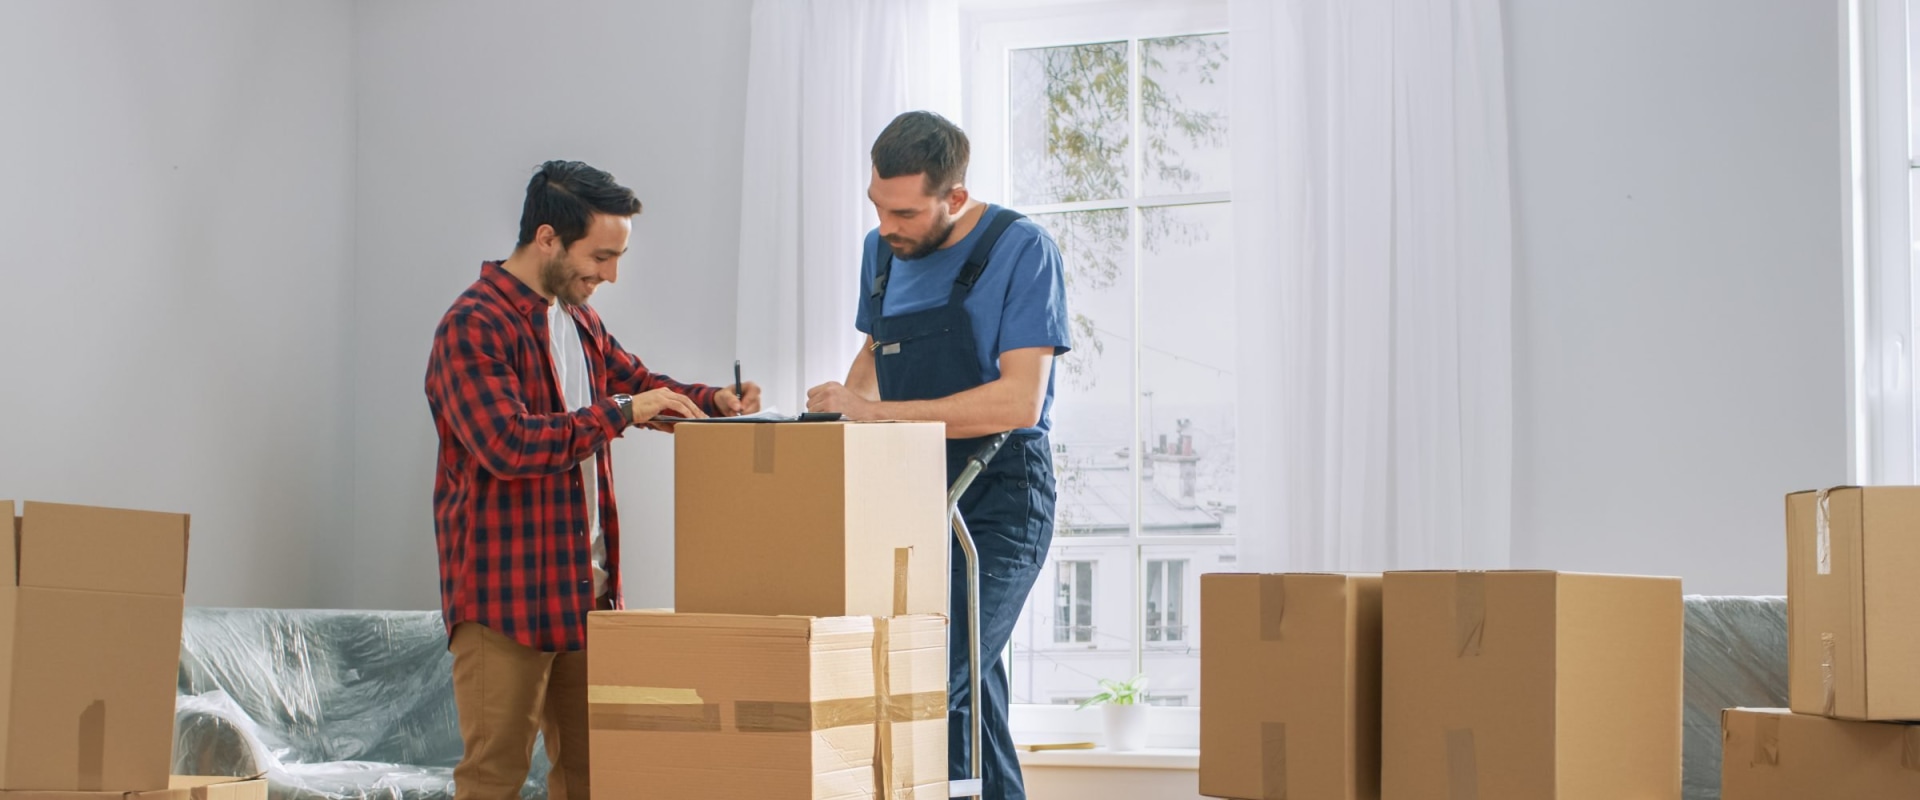 Tips for Moving with Professional Movers